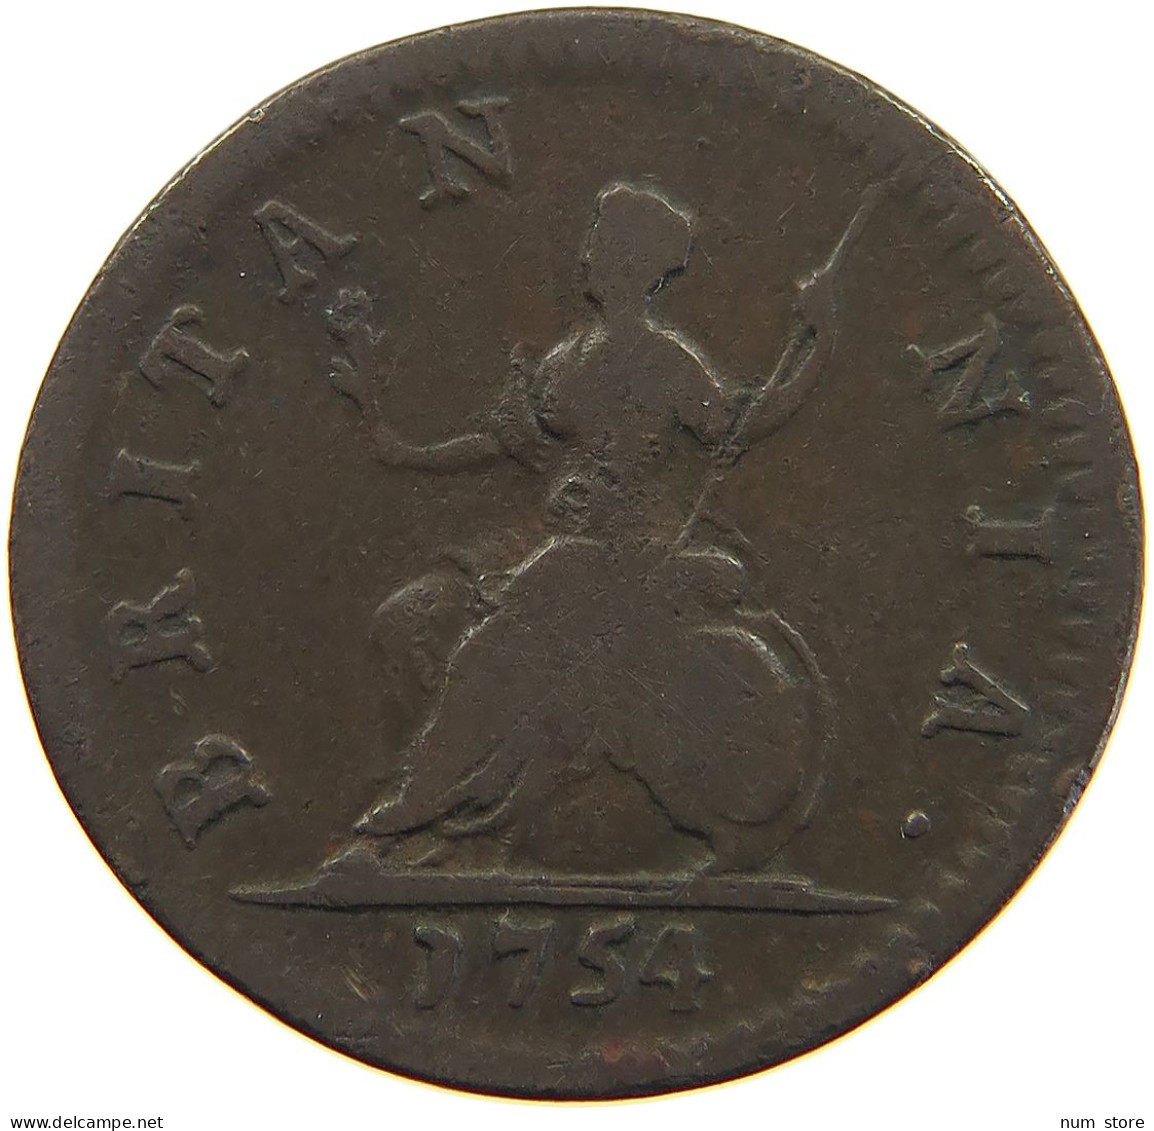 GREAT BRITAIN FARTHING 1754 George II. 1727-1760. #t001 0411 - A. 1 Farthing